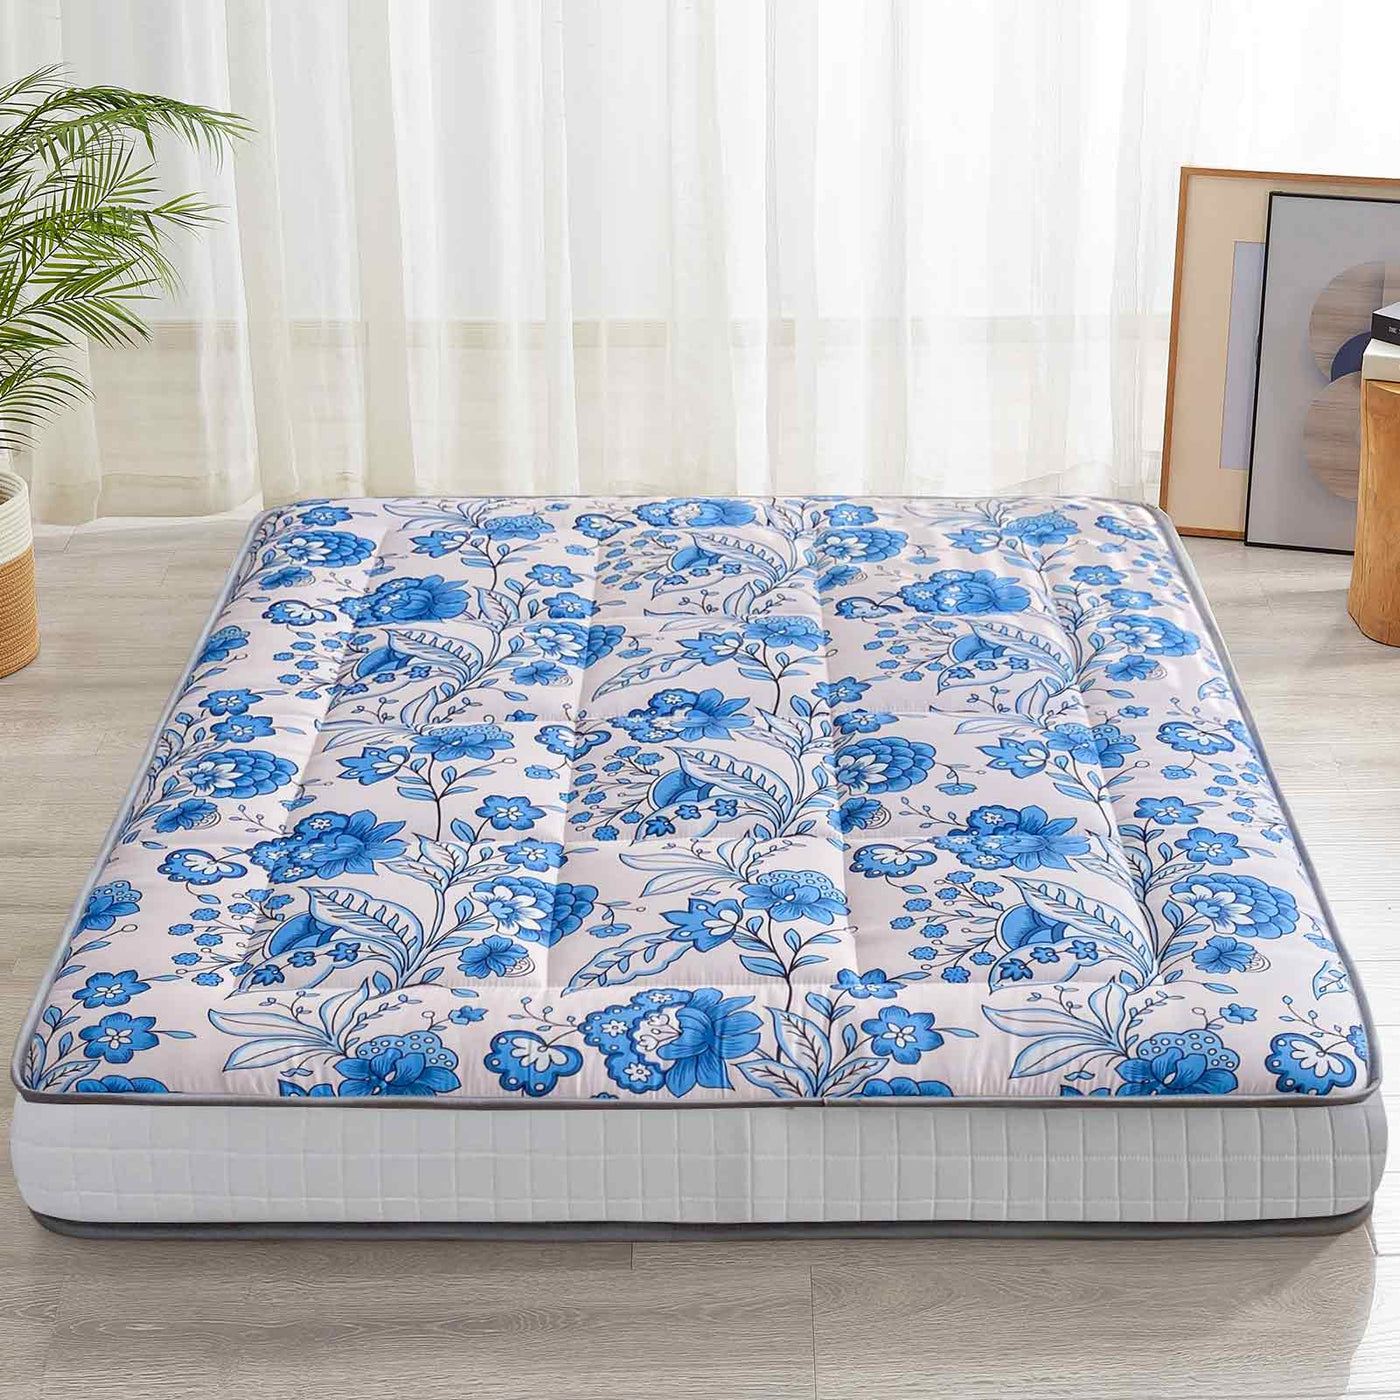 MAXYOYO 6" Extra Thick Japanese Futon Bed, Little Fresh Blue Flower Pattern Floor Mattress for Home